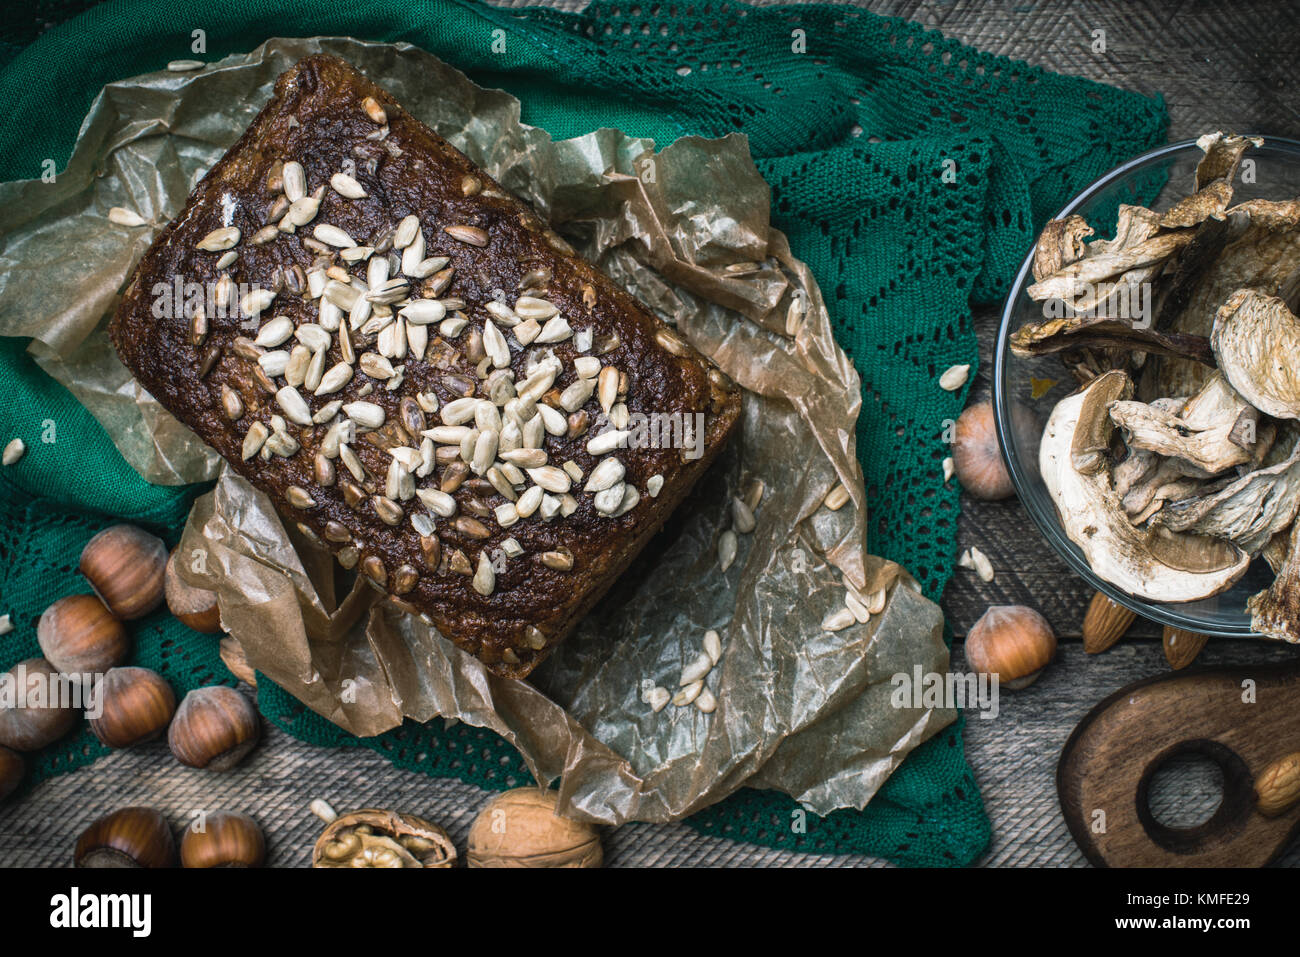 Closeup of bread with seeds, nuts and mushrooms in rustic style Stock Photo